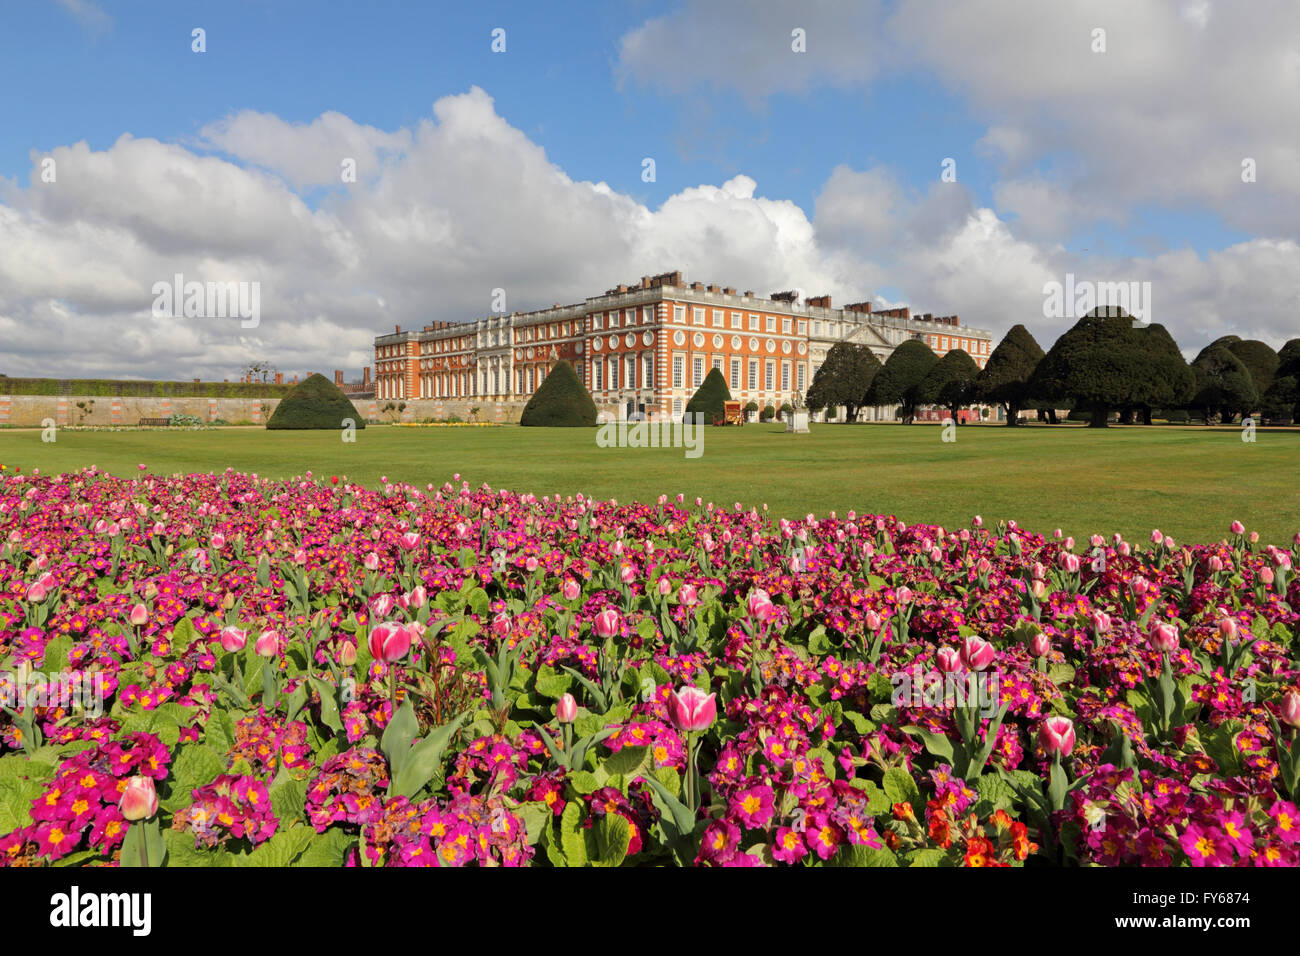 Hampton Court Palace, London, UK. 23rd April 2016. The tulips and primulas are in full bloom, creating a dazzling display of colour at Hampton Court Palace Gardens. After an online campaign by local residents to retain free access to the Palace Formal Gardens, HRP at Hampton Court have kindly agreed to allow free access between 9 and 10am every day. So get up early and enjoy a stroll, and be king or queen of the garden for an hour. I was the only person there other than two groundsmen! Stock Photo